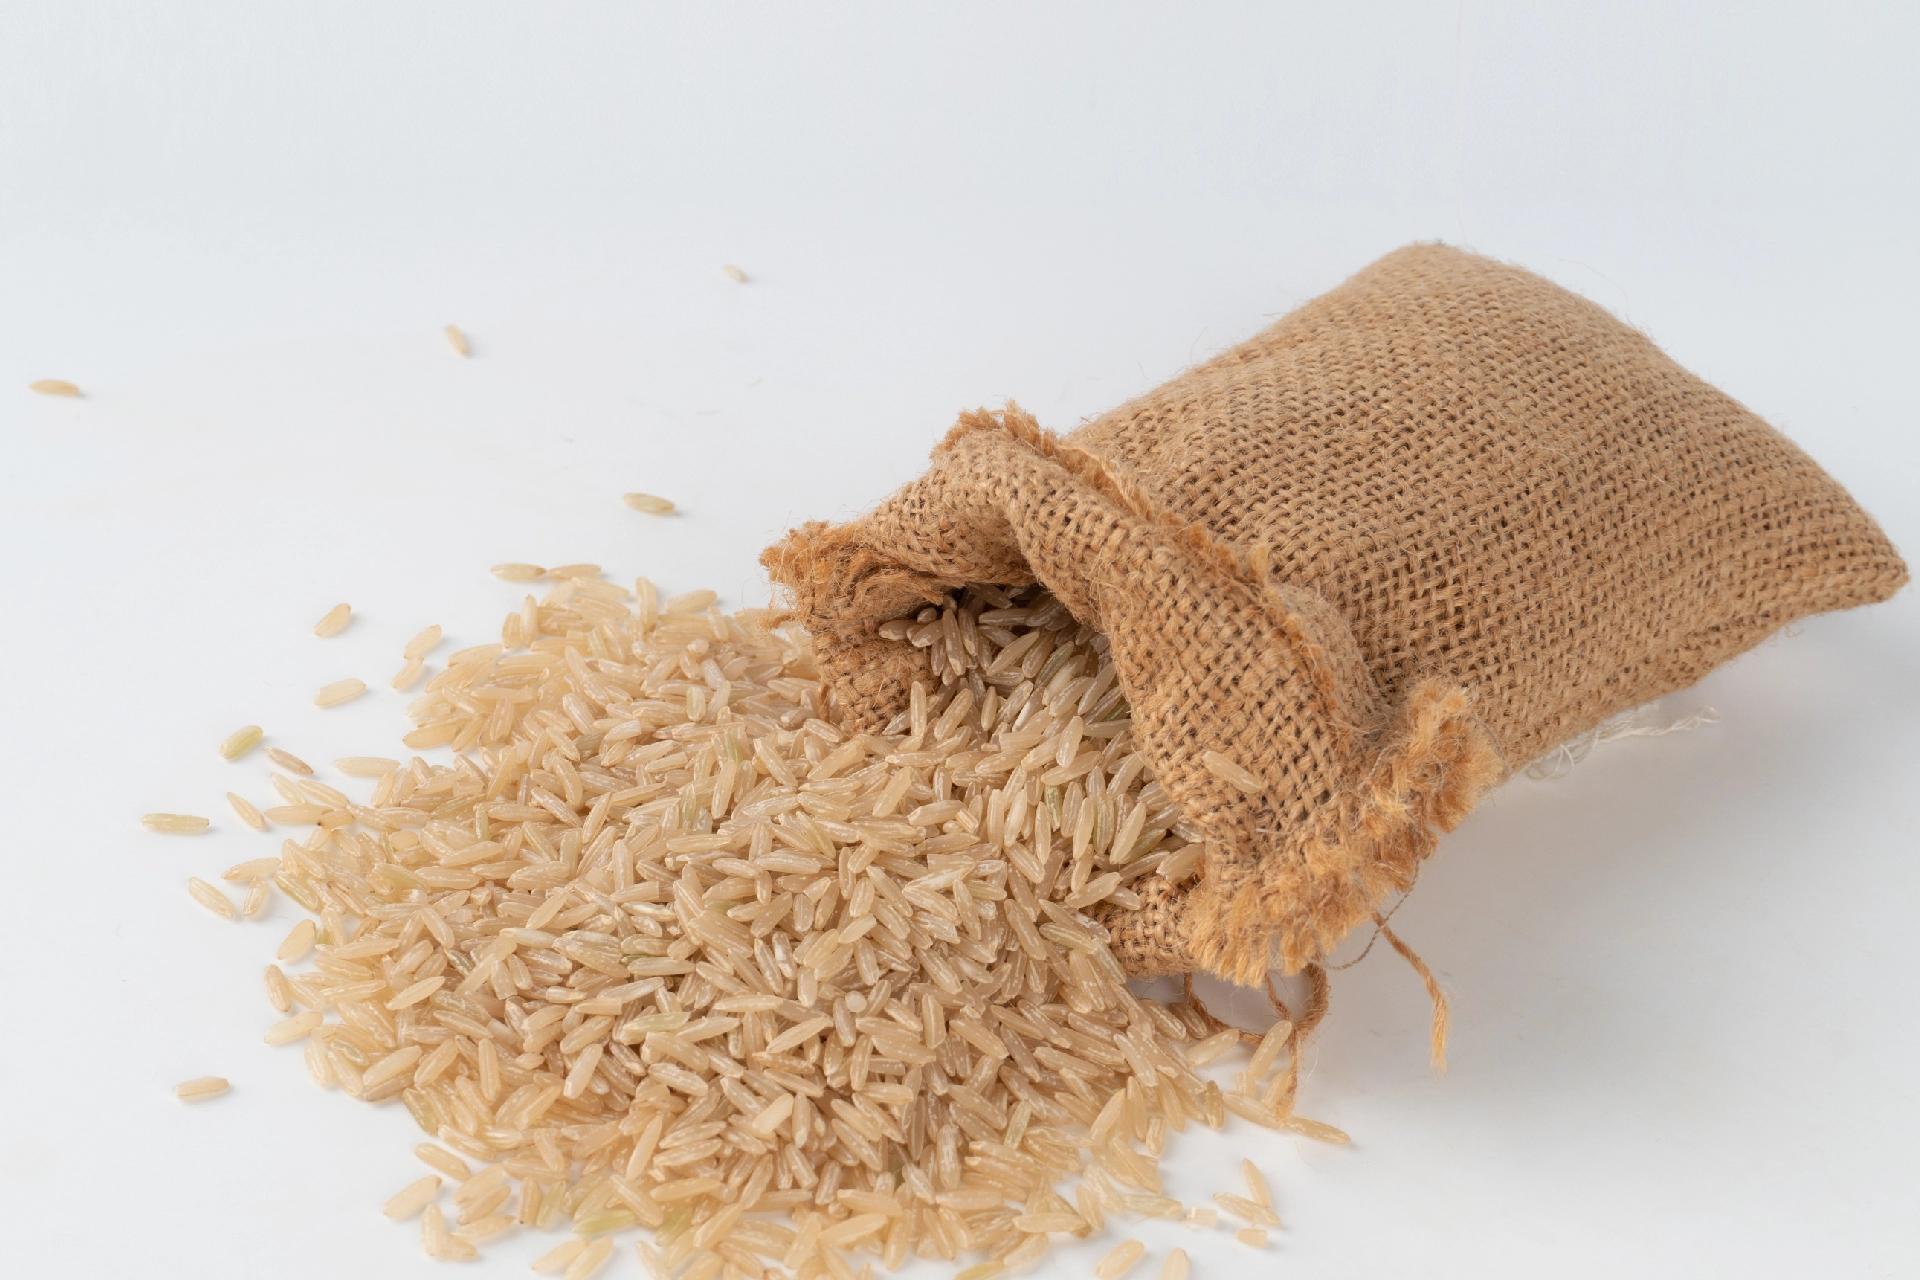 Brown Rice Benefits, Nutrition Facts, and Side Effects